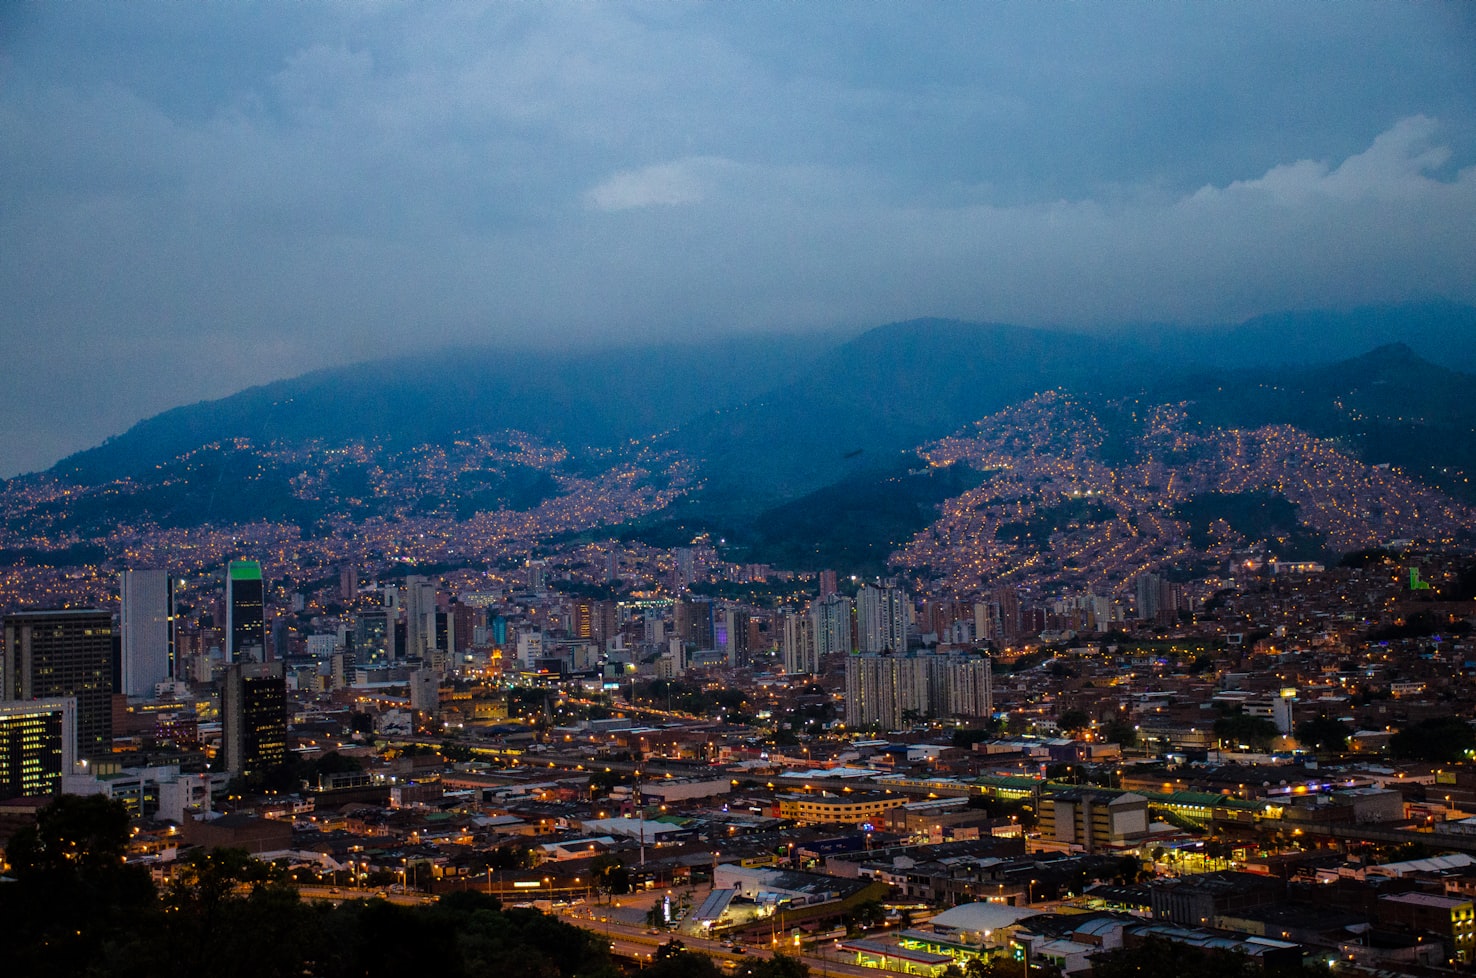 Medellin, Colombia is the most popular city for digital nomads in South America